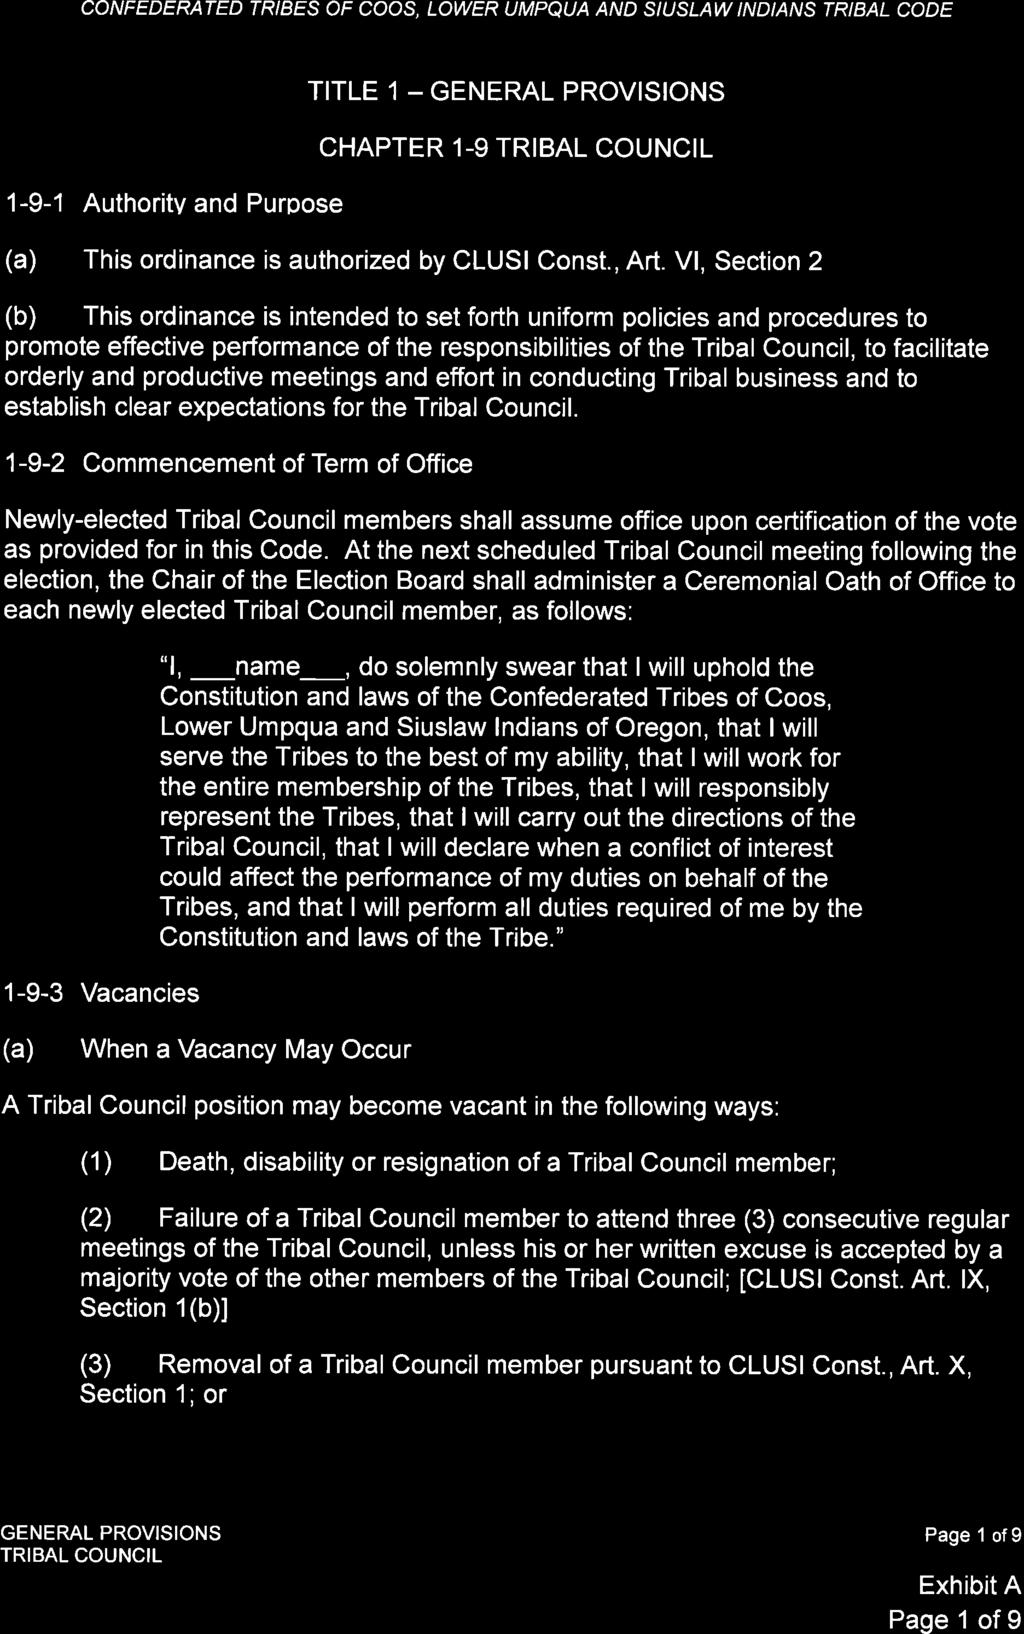 CONFEDERATED TRIBES OF COOS, LOWER UMPQUA AND S/US AW INDIANS TRIBAL CODE TITLE 1 - CHAPTER 1-9 1-9-1 Authority and Purpose (a) This ordinance is authorized by CLUSI Const., Art.